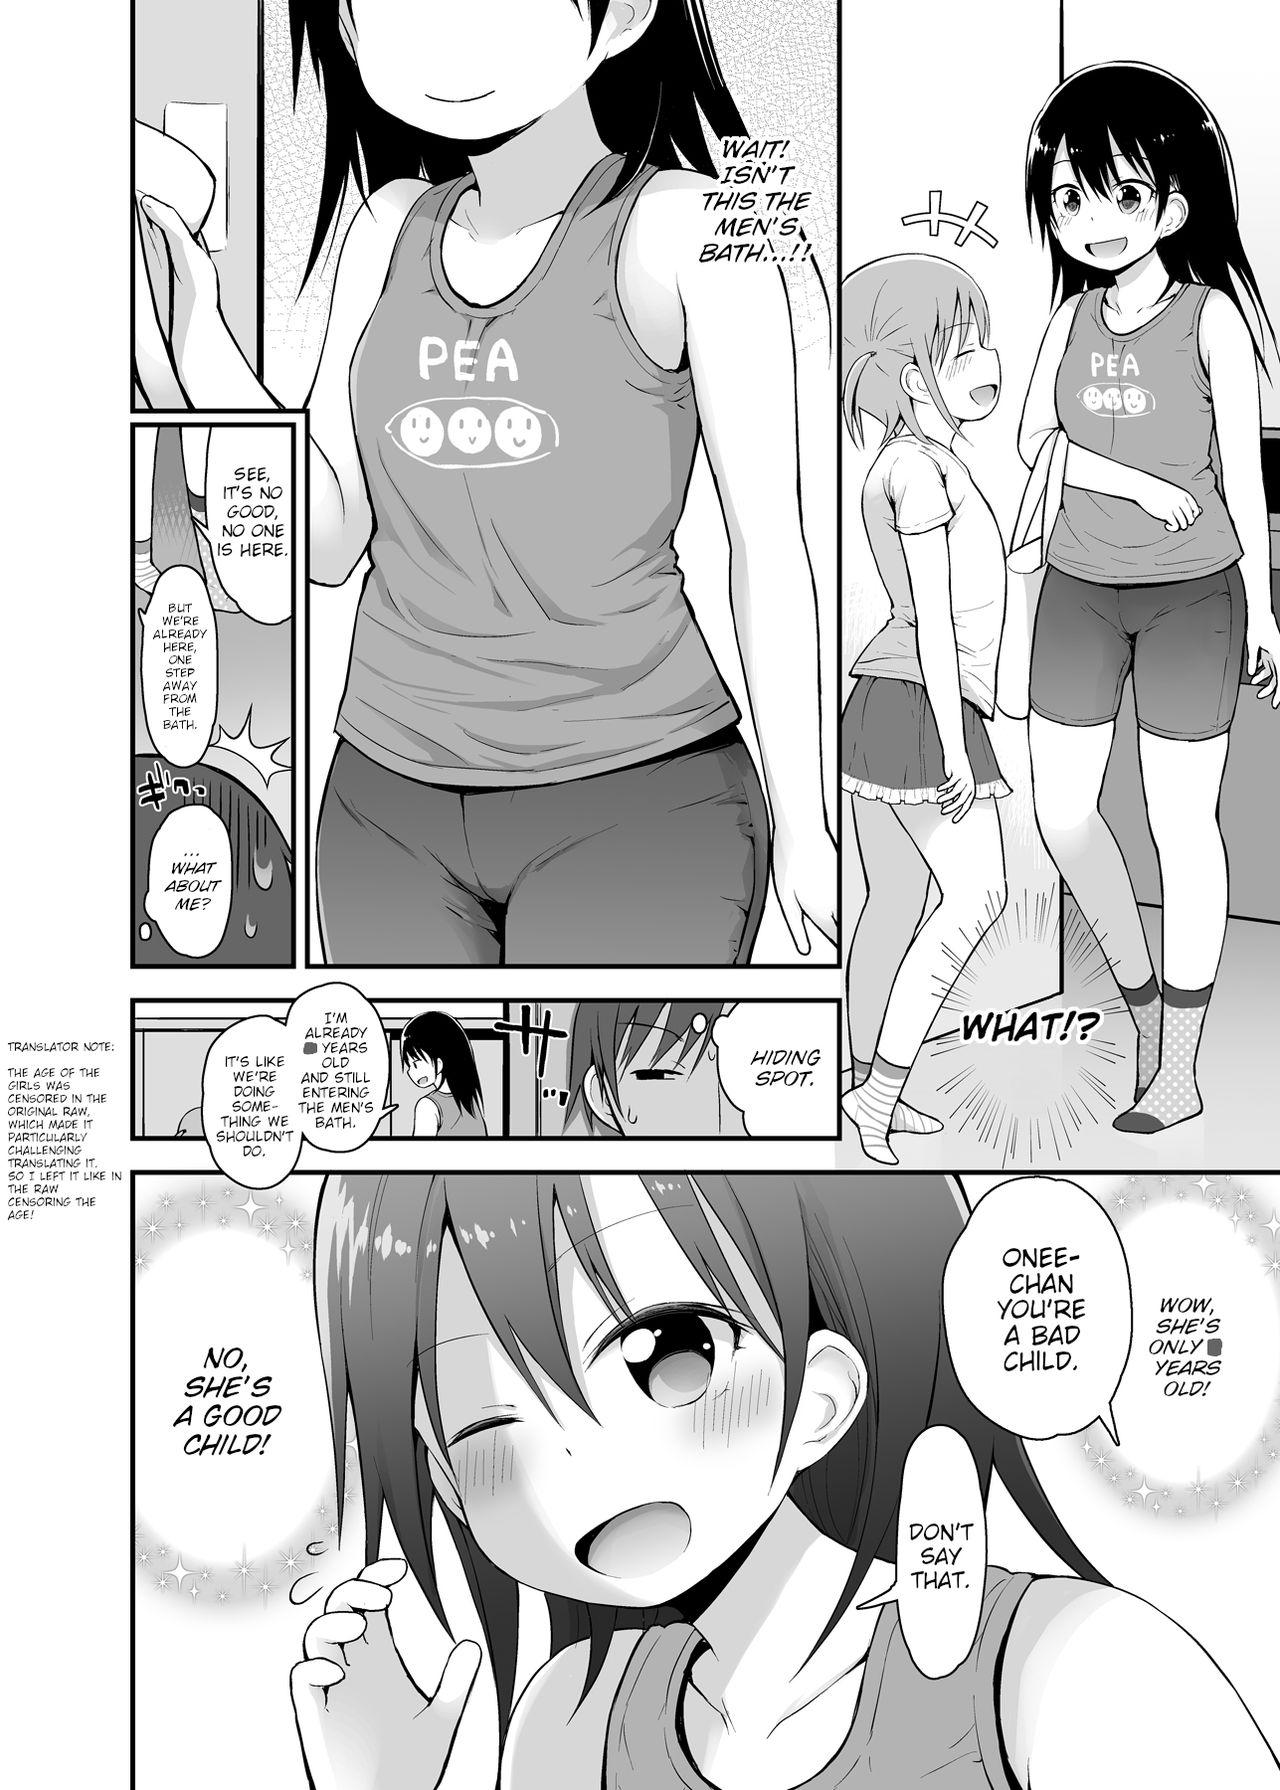 Extreme Onnanoko datte Otokoyu ni Hairitai 3 | They may just be little girls, but they still want to enter the men's bath! 3 - Original Infiel - Page 3